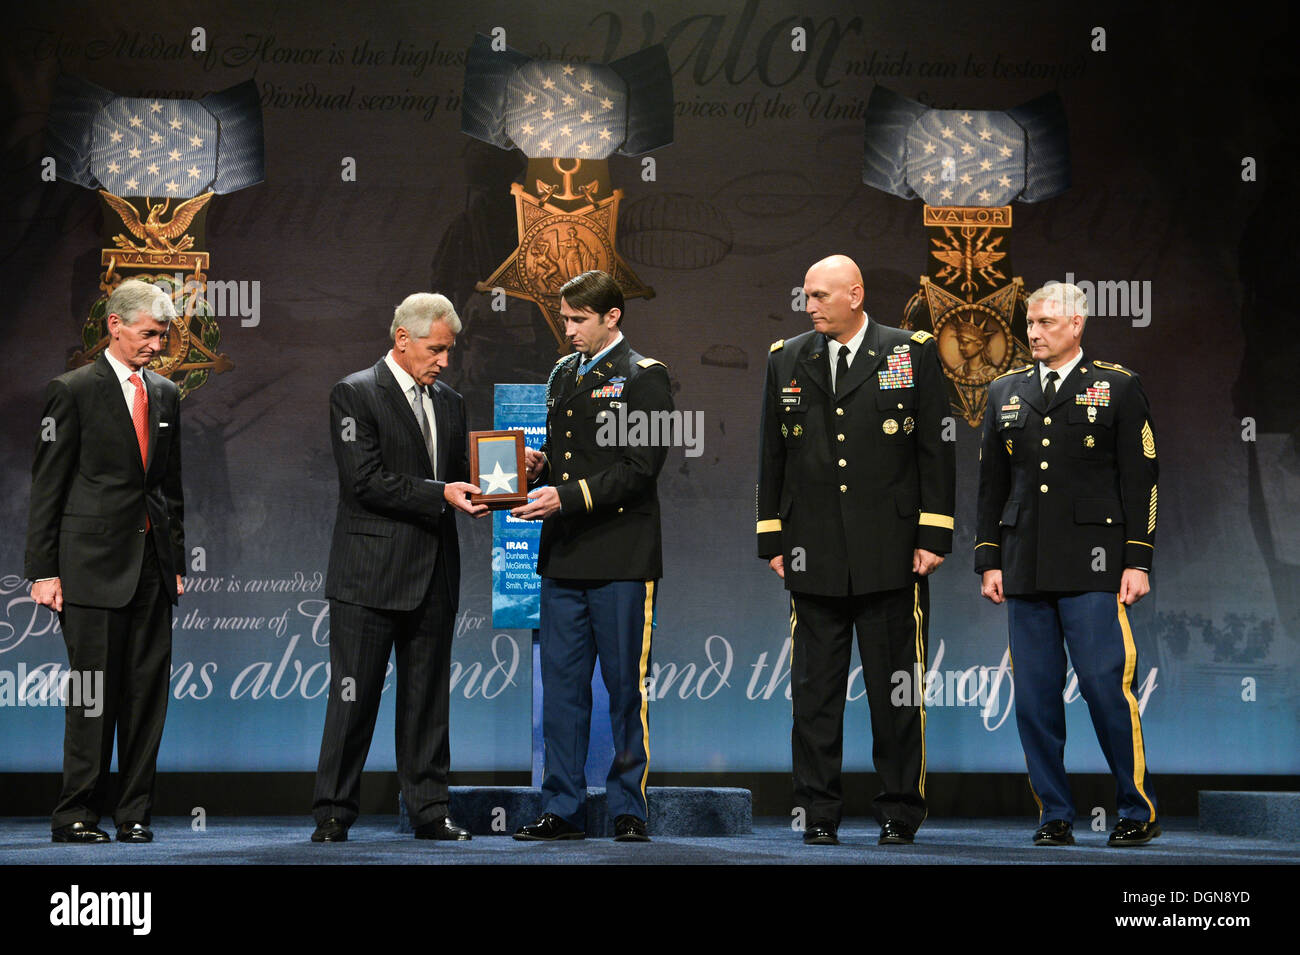 From left to right, Secretary of Defense Chuck Hagel, Secretary of the Army John McHugh, former U.S. Army Capt. William D. Swenson, Chief of Staff of the Army Gen. Raymond T. Odierno and Sgt. Maj. of the Army Raymond F. Chandler III with the Medal of Hono Stock Photo